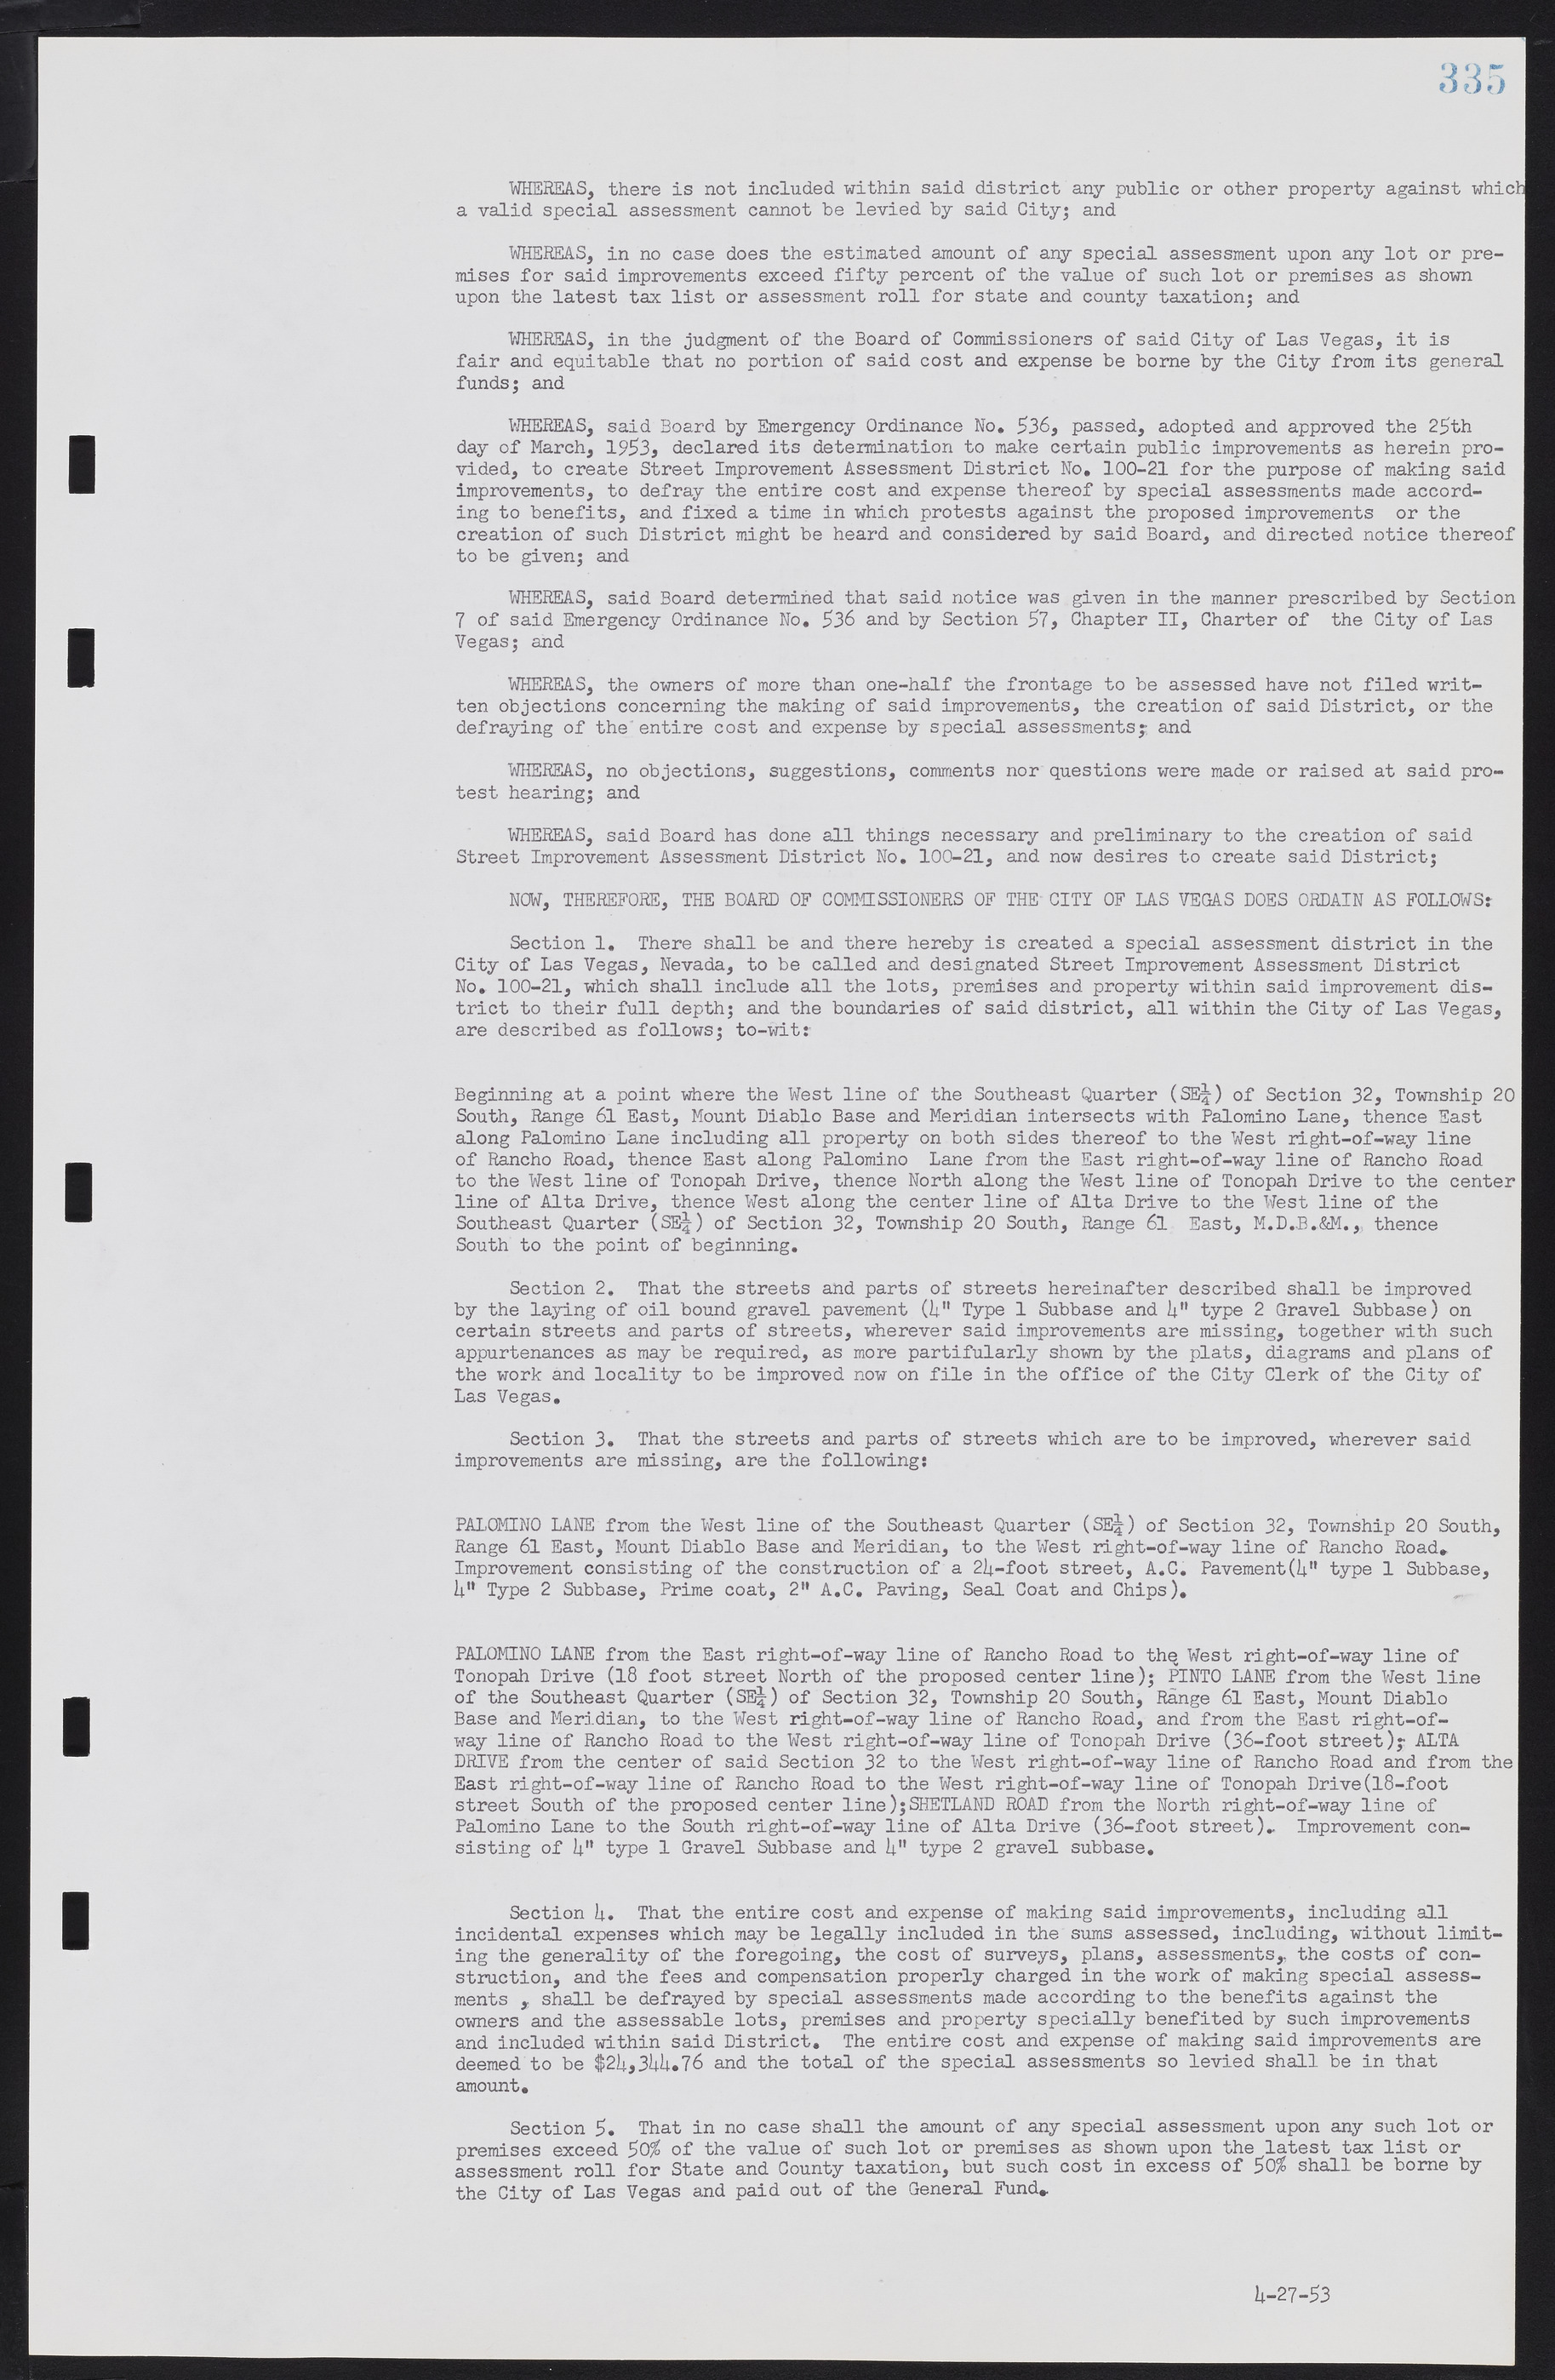 Las Vegas City Commission Minutes, May 26, 1952 to February 17, 1954, lvc000008-363